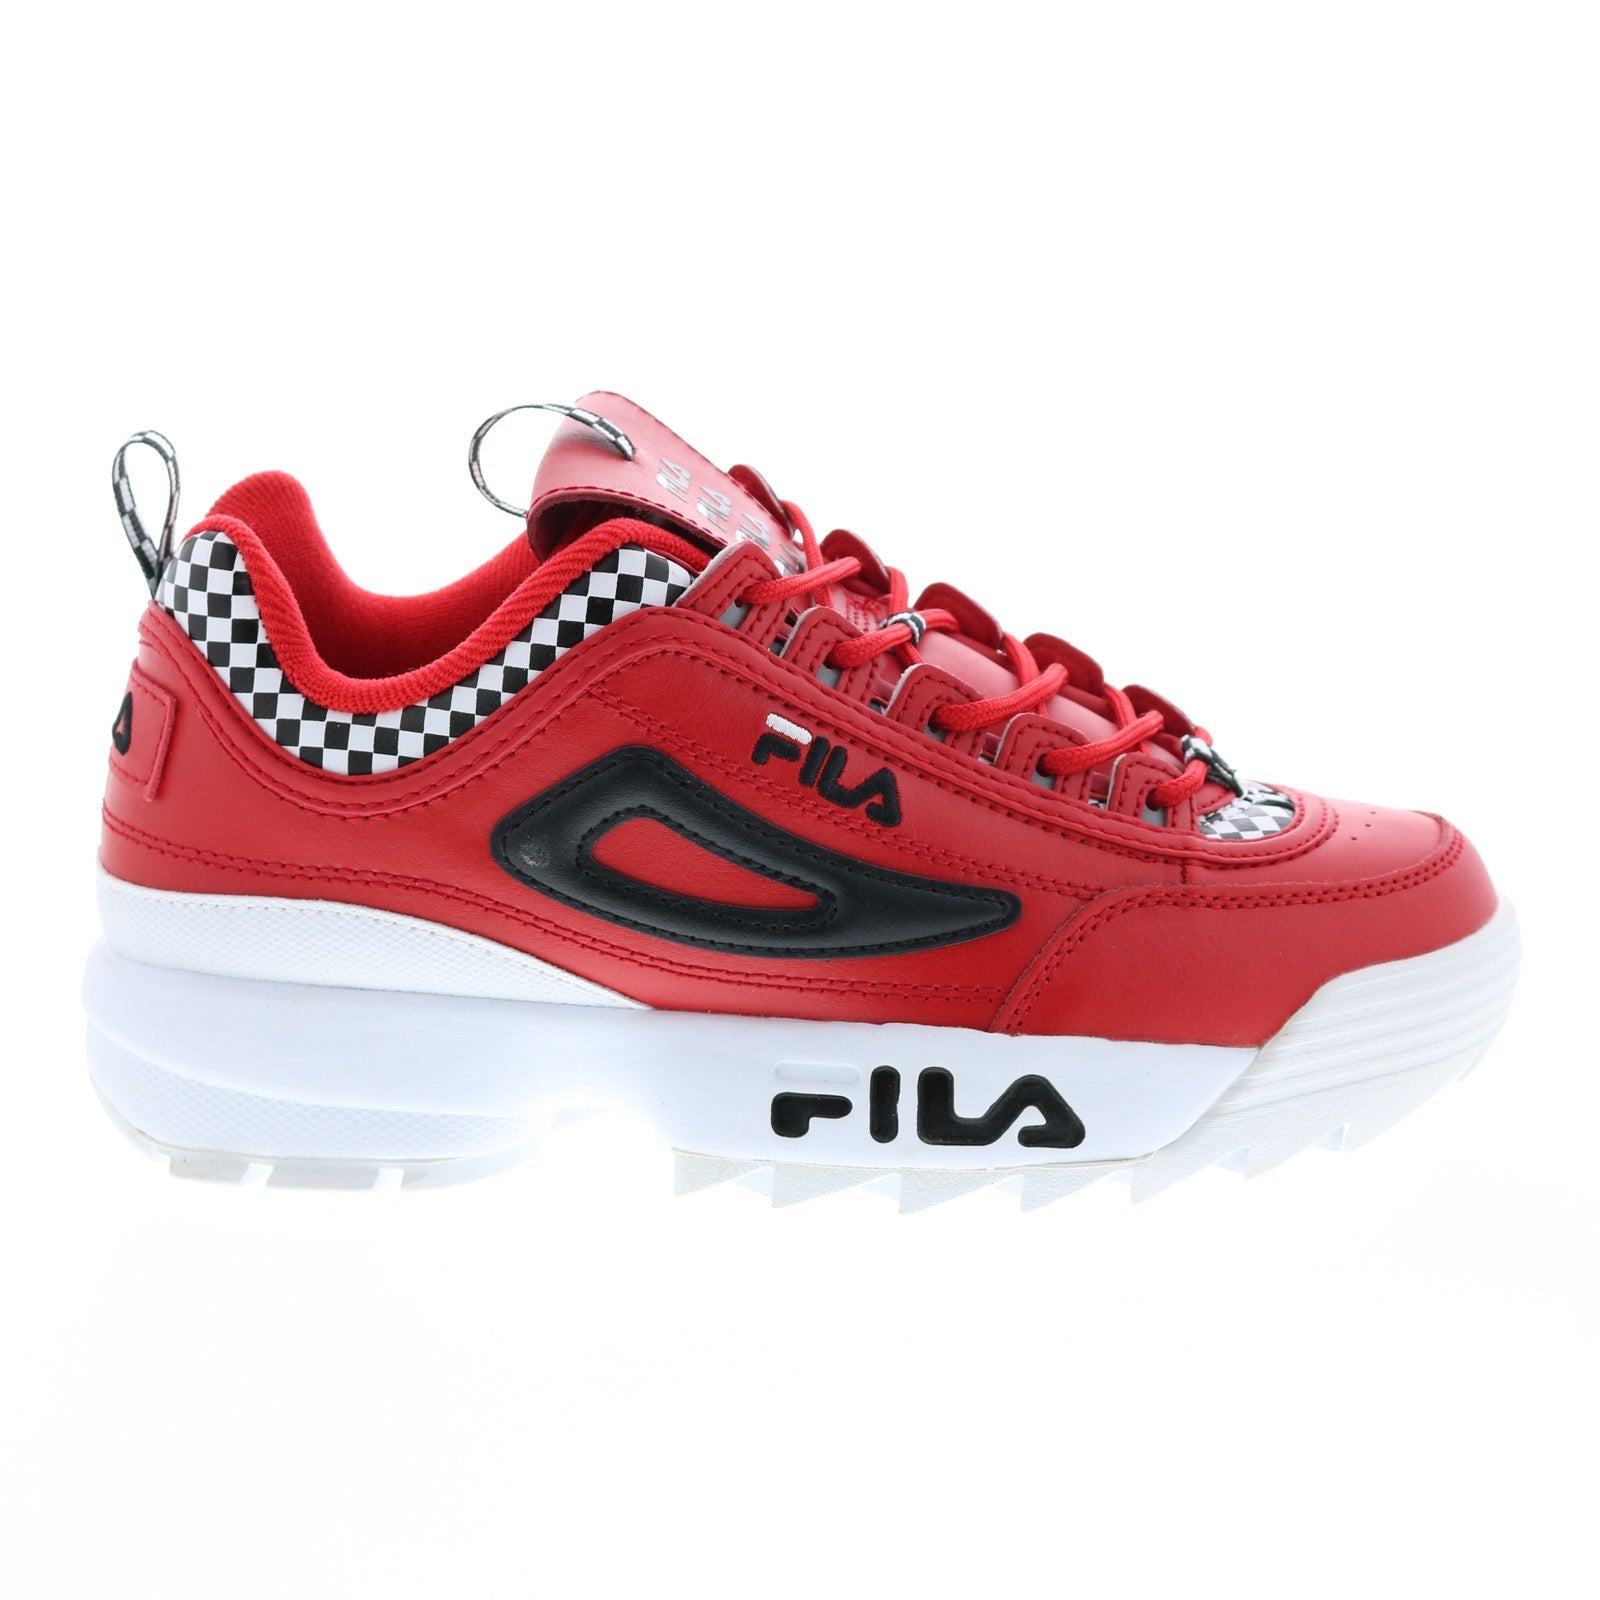 Disruptor II Premium Rt Cheker Mens Red Lifestyle Sneakers Shoes - Ruze Shoes